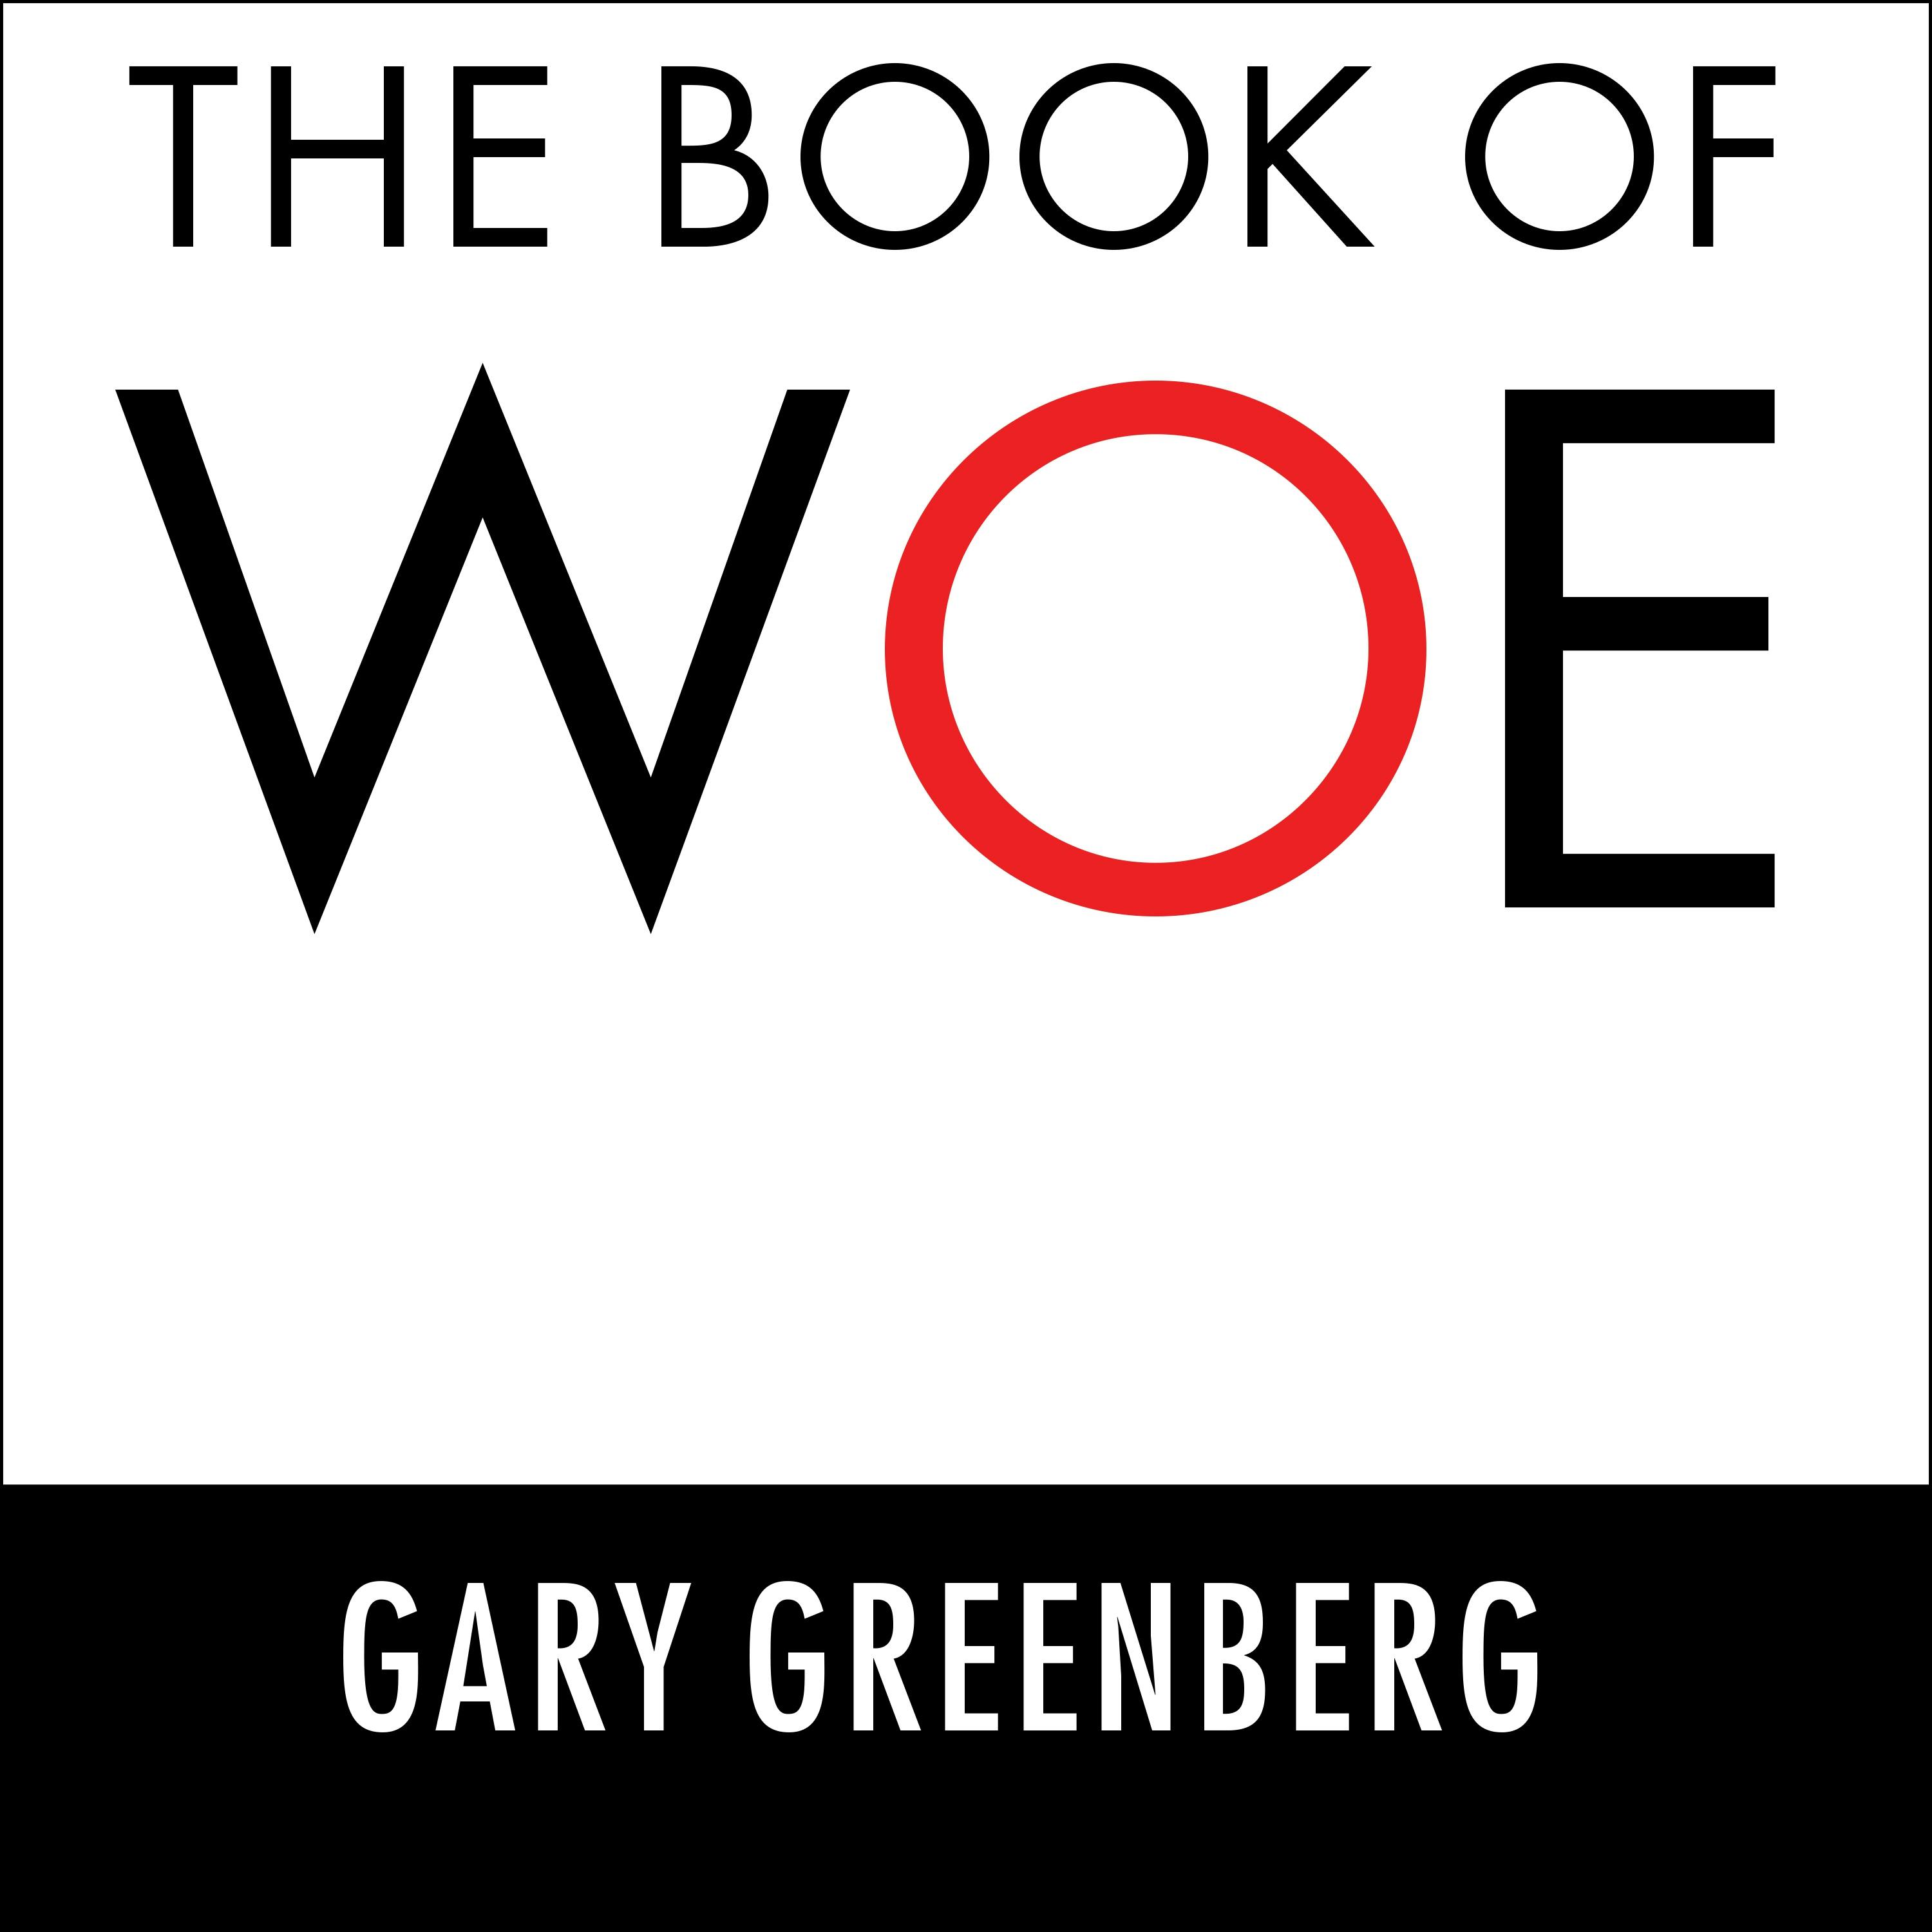 The Book of Woe: The DSM and the Unmaking of Psychiatry - undefined